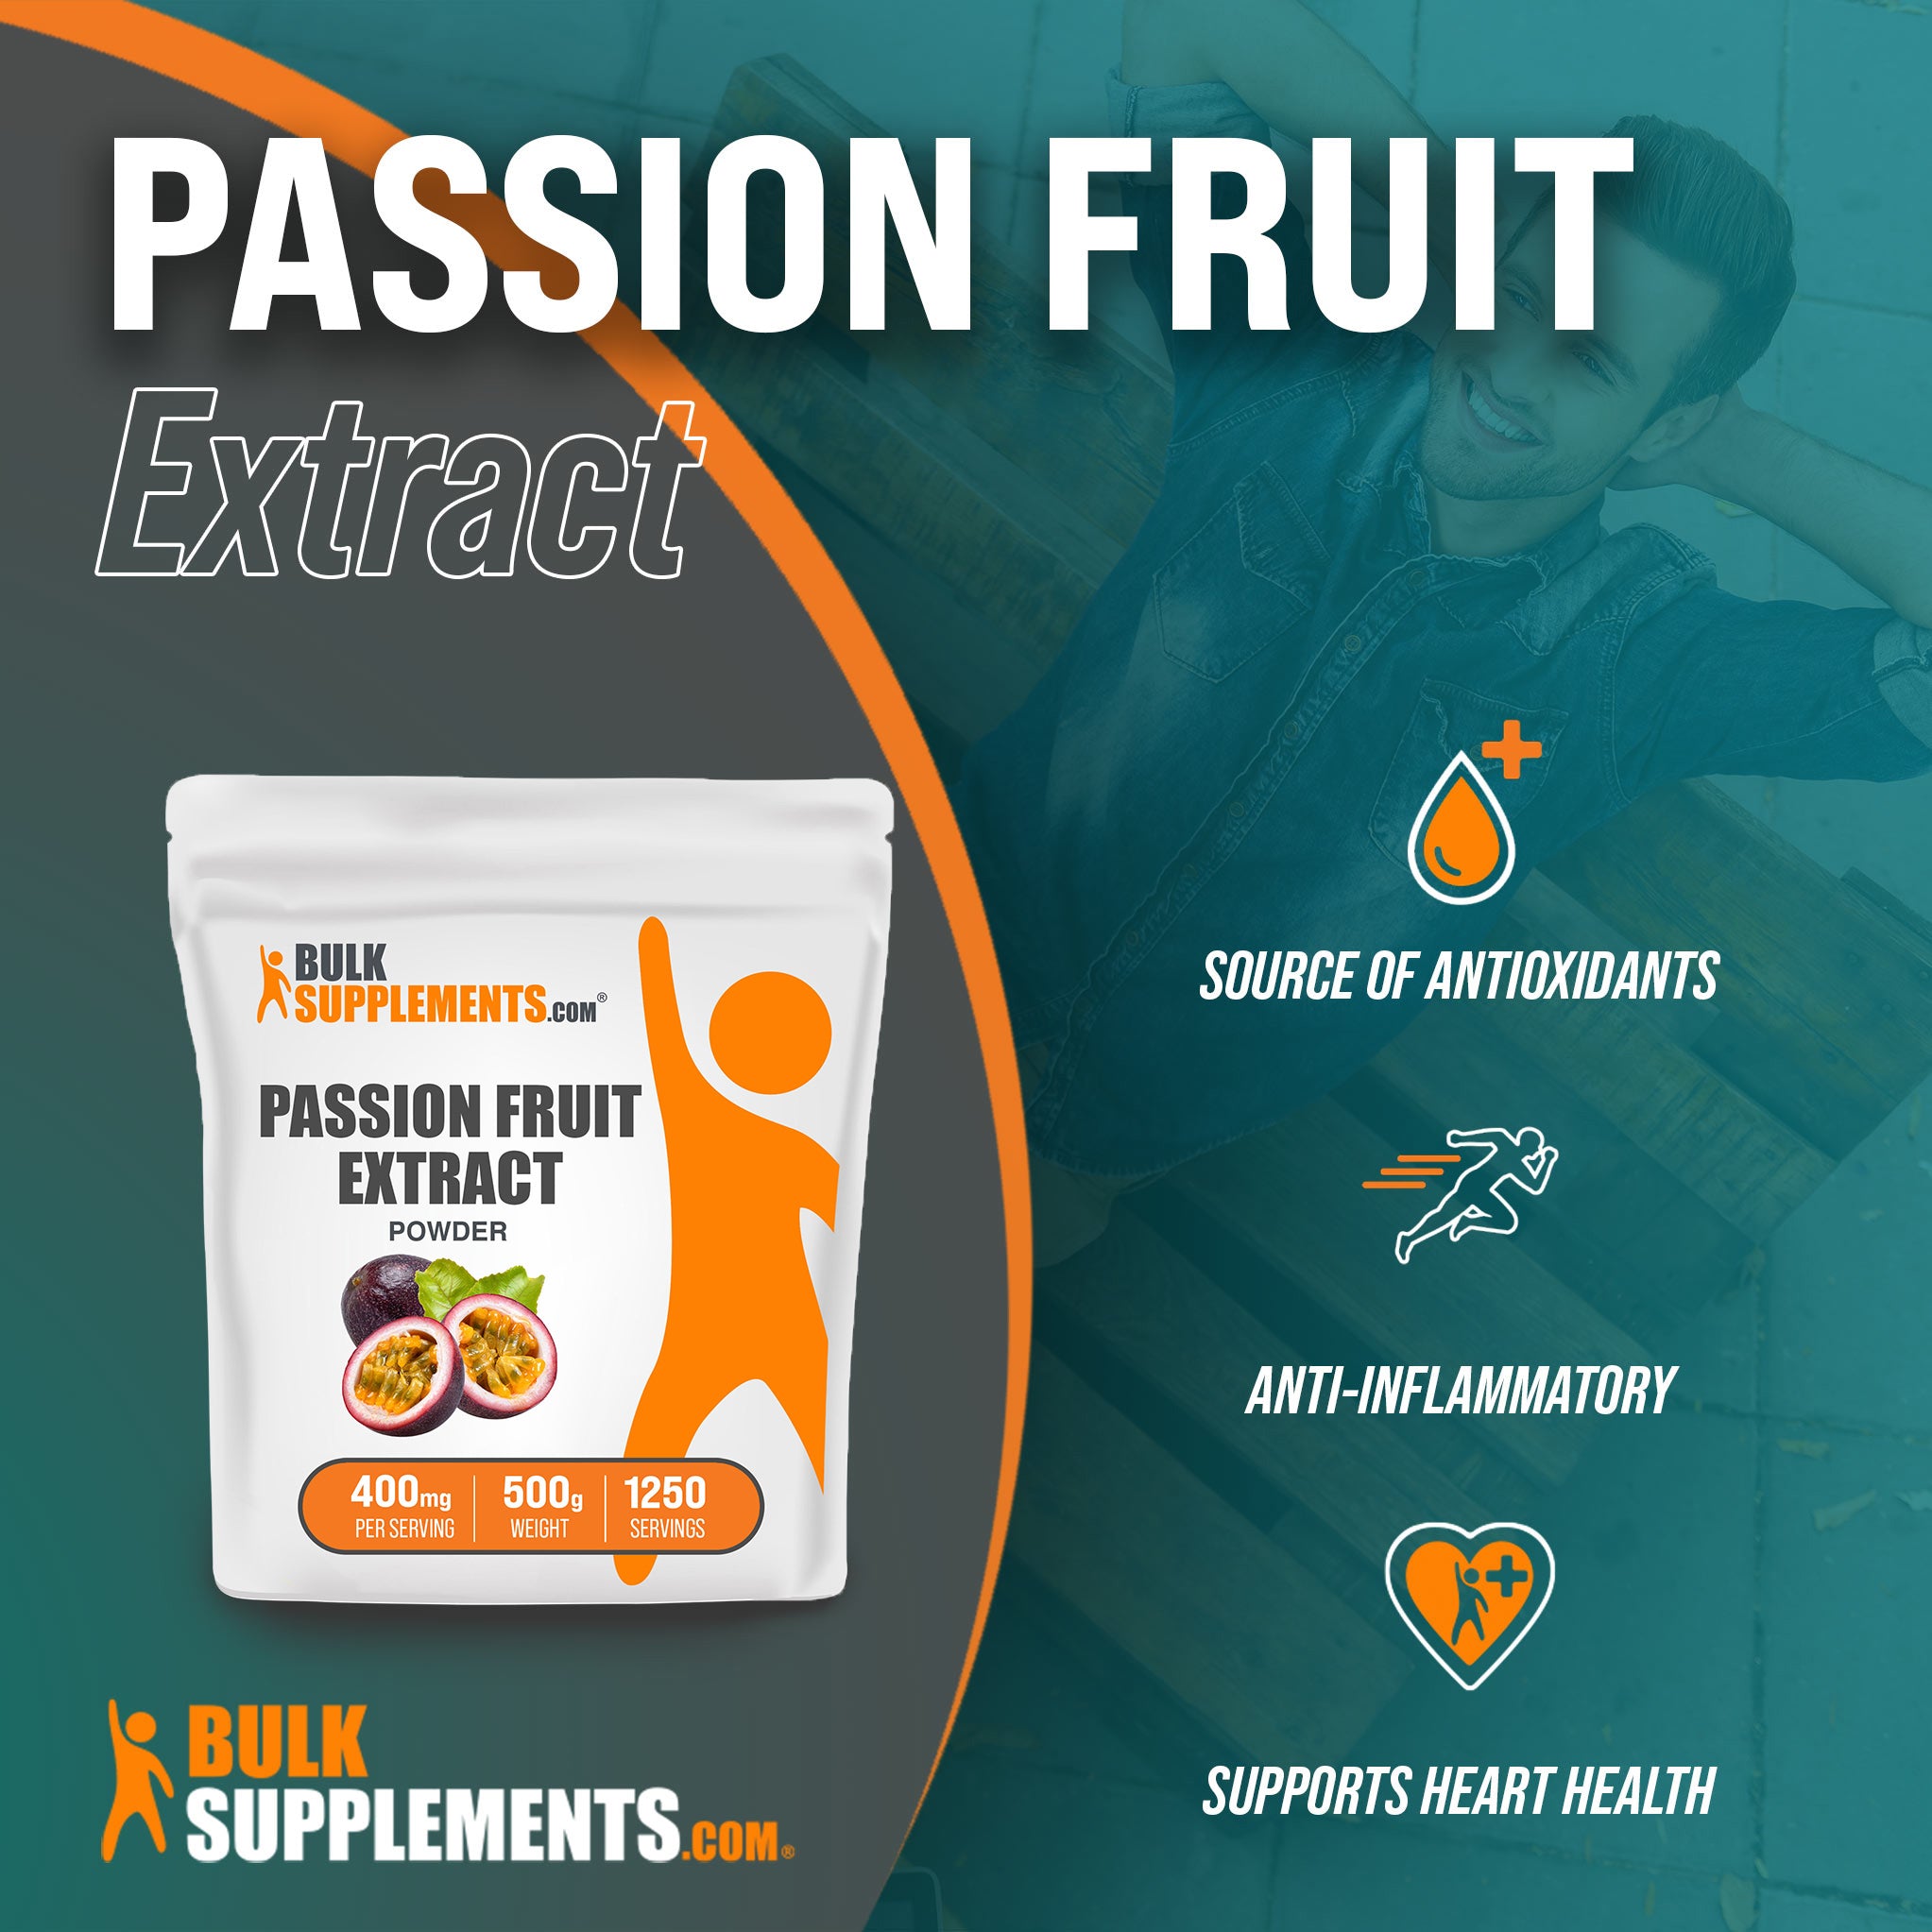 Benefits of Passion Fruit Extract: source of antioxidants, anti-inflammatory, supports heart health